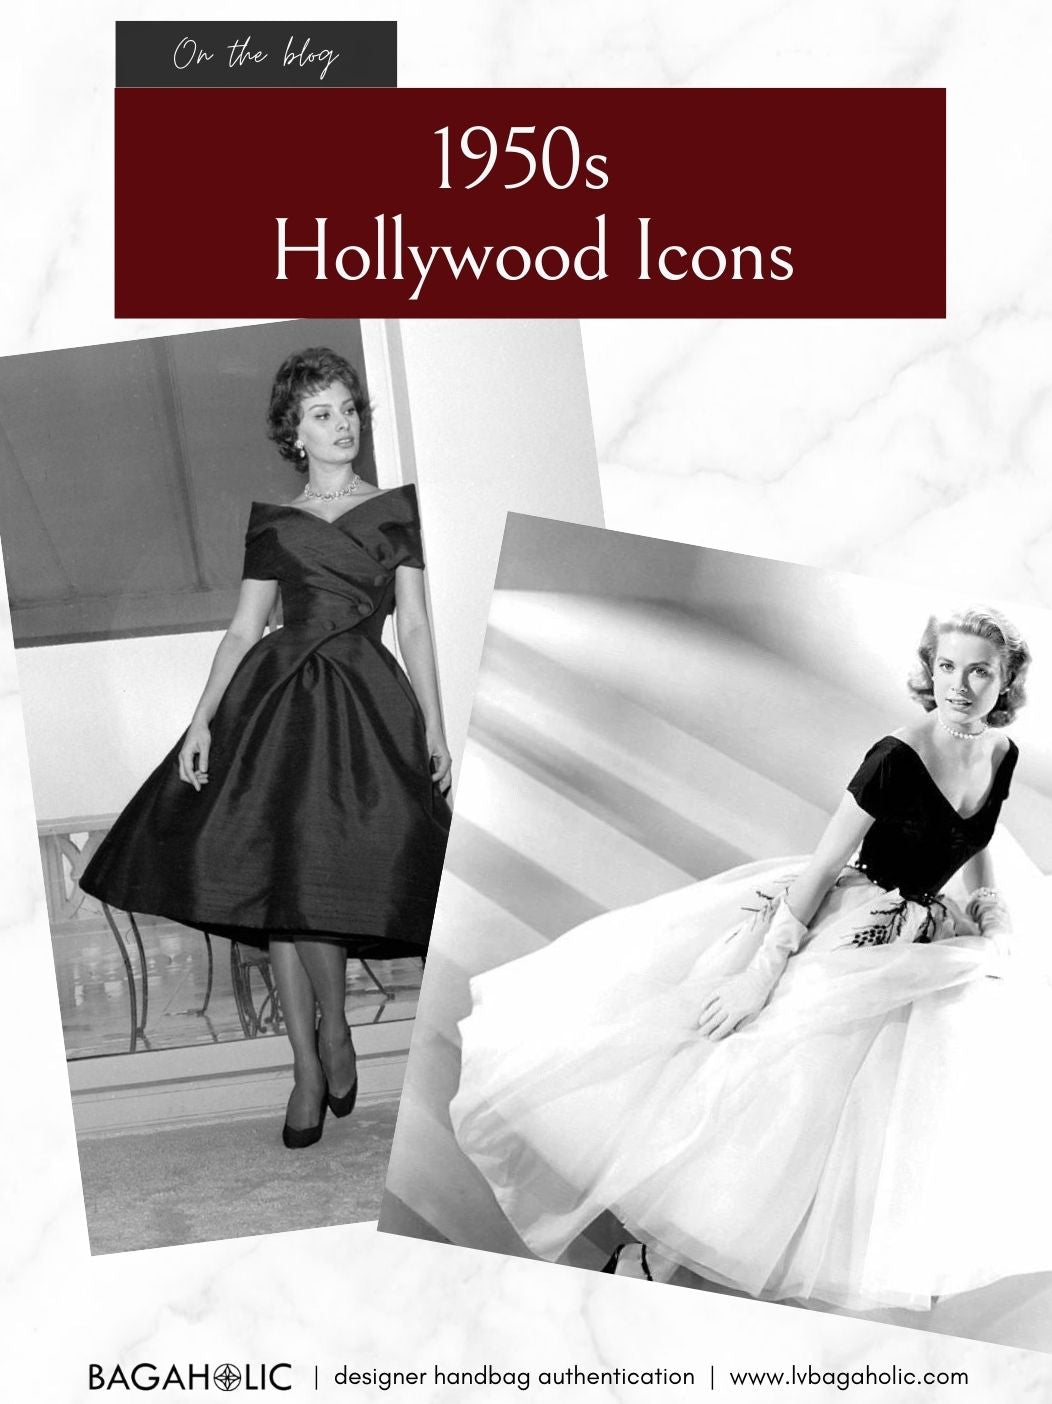 From Monroe To Hepburn: How 1950s Actresses Influenced Clothing Trends